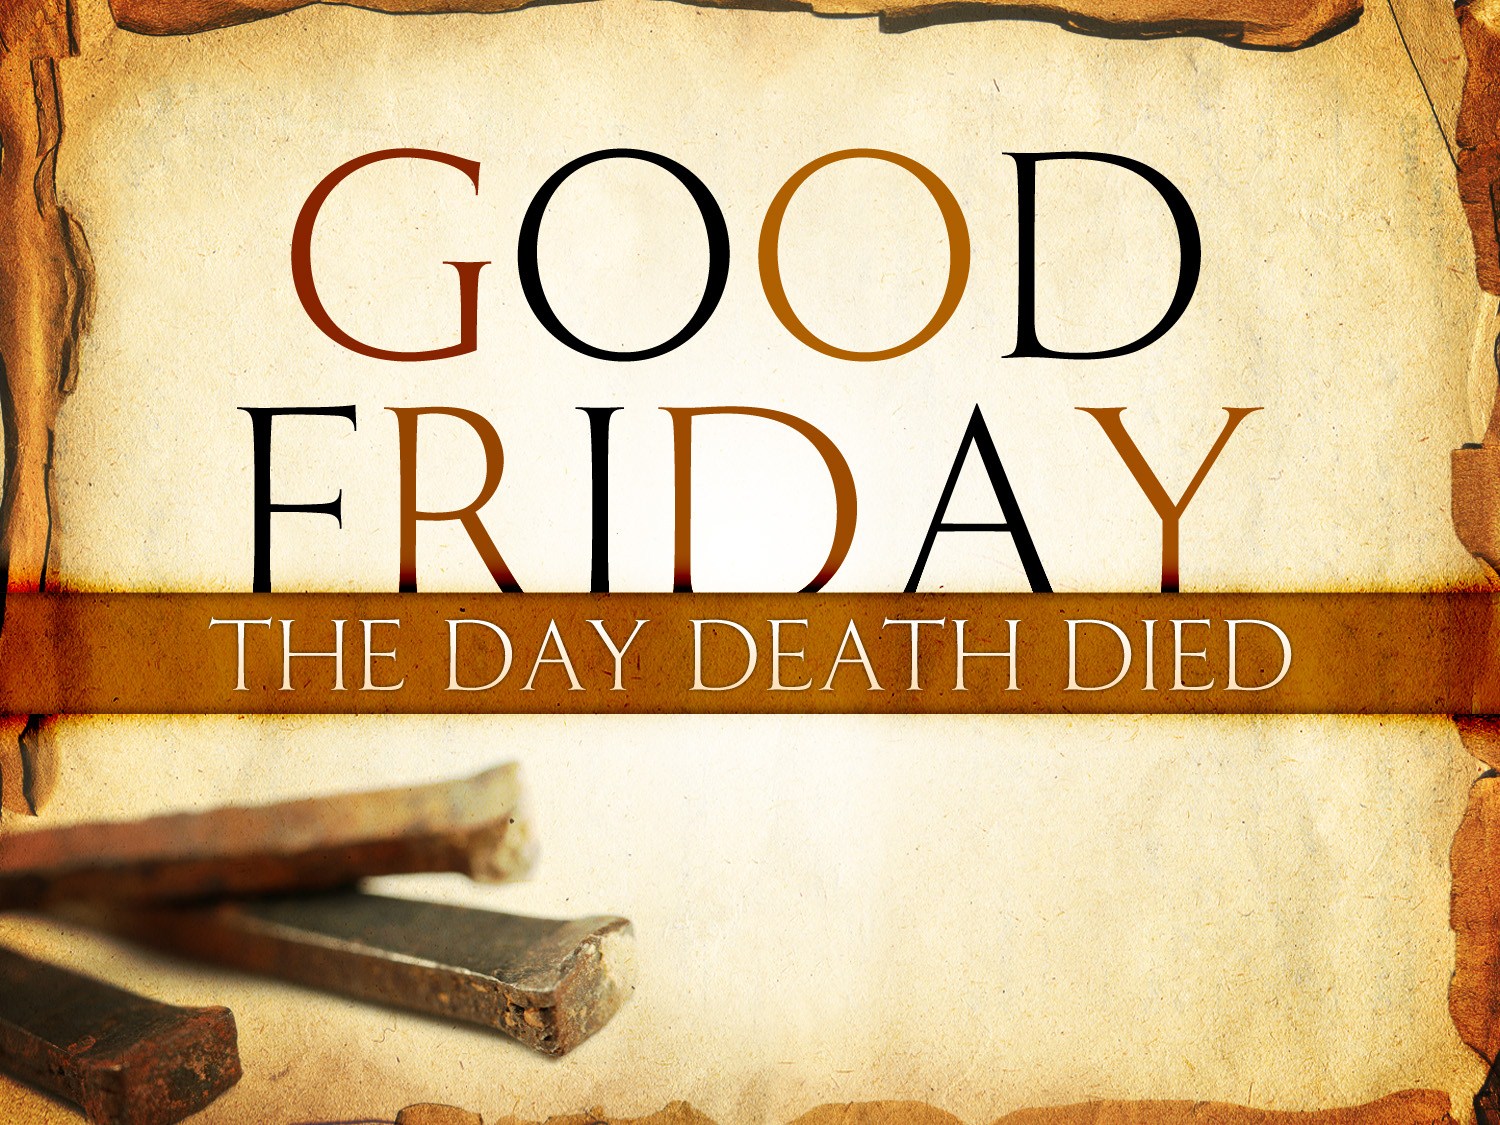 Good-Friday-Wallpaper-06 | Happy Friday Wishes Quotes 2016 - Good ...